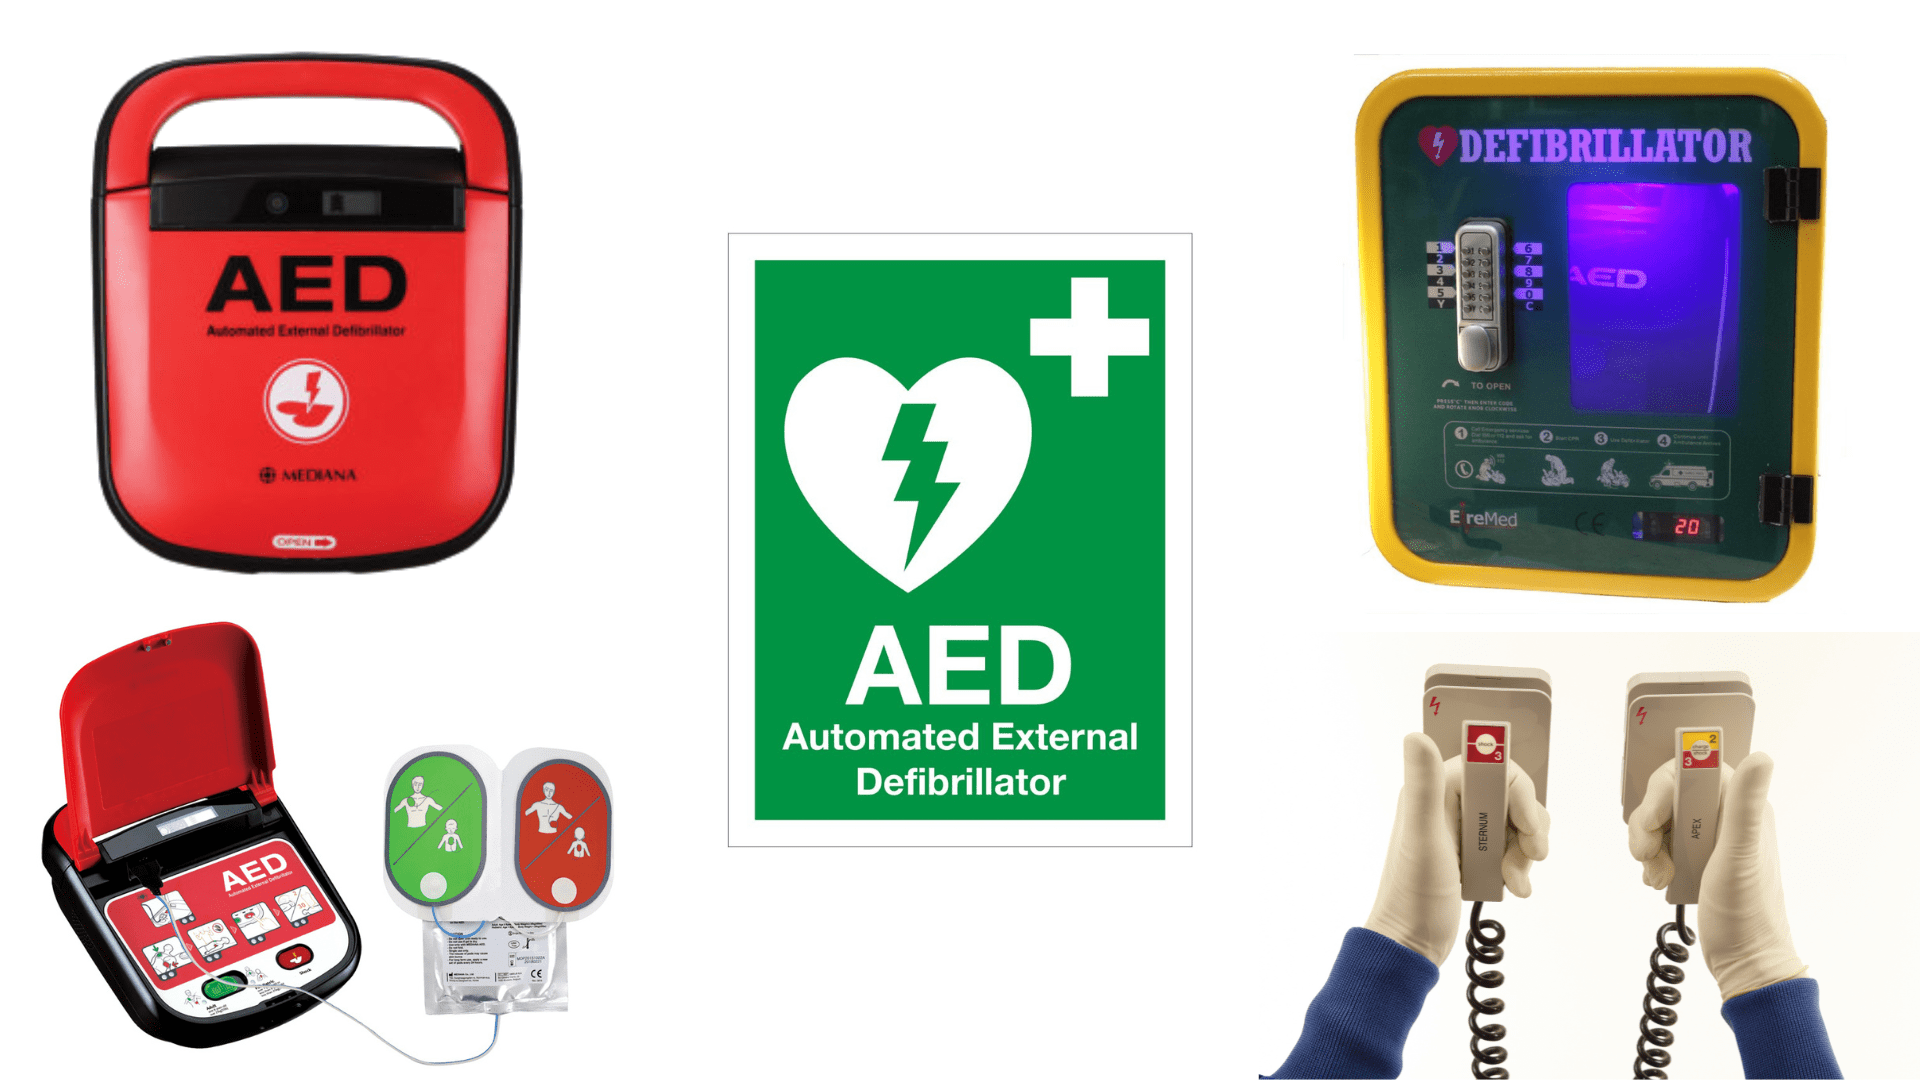 What is a defibrillator